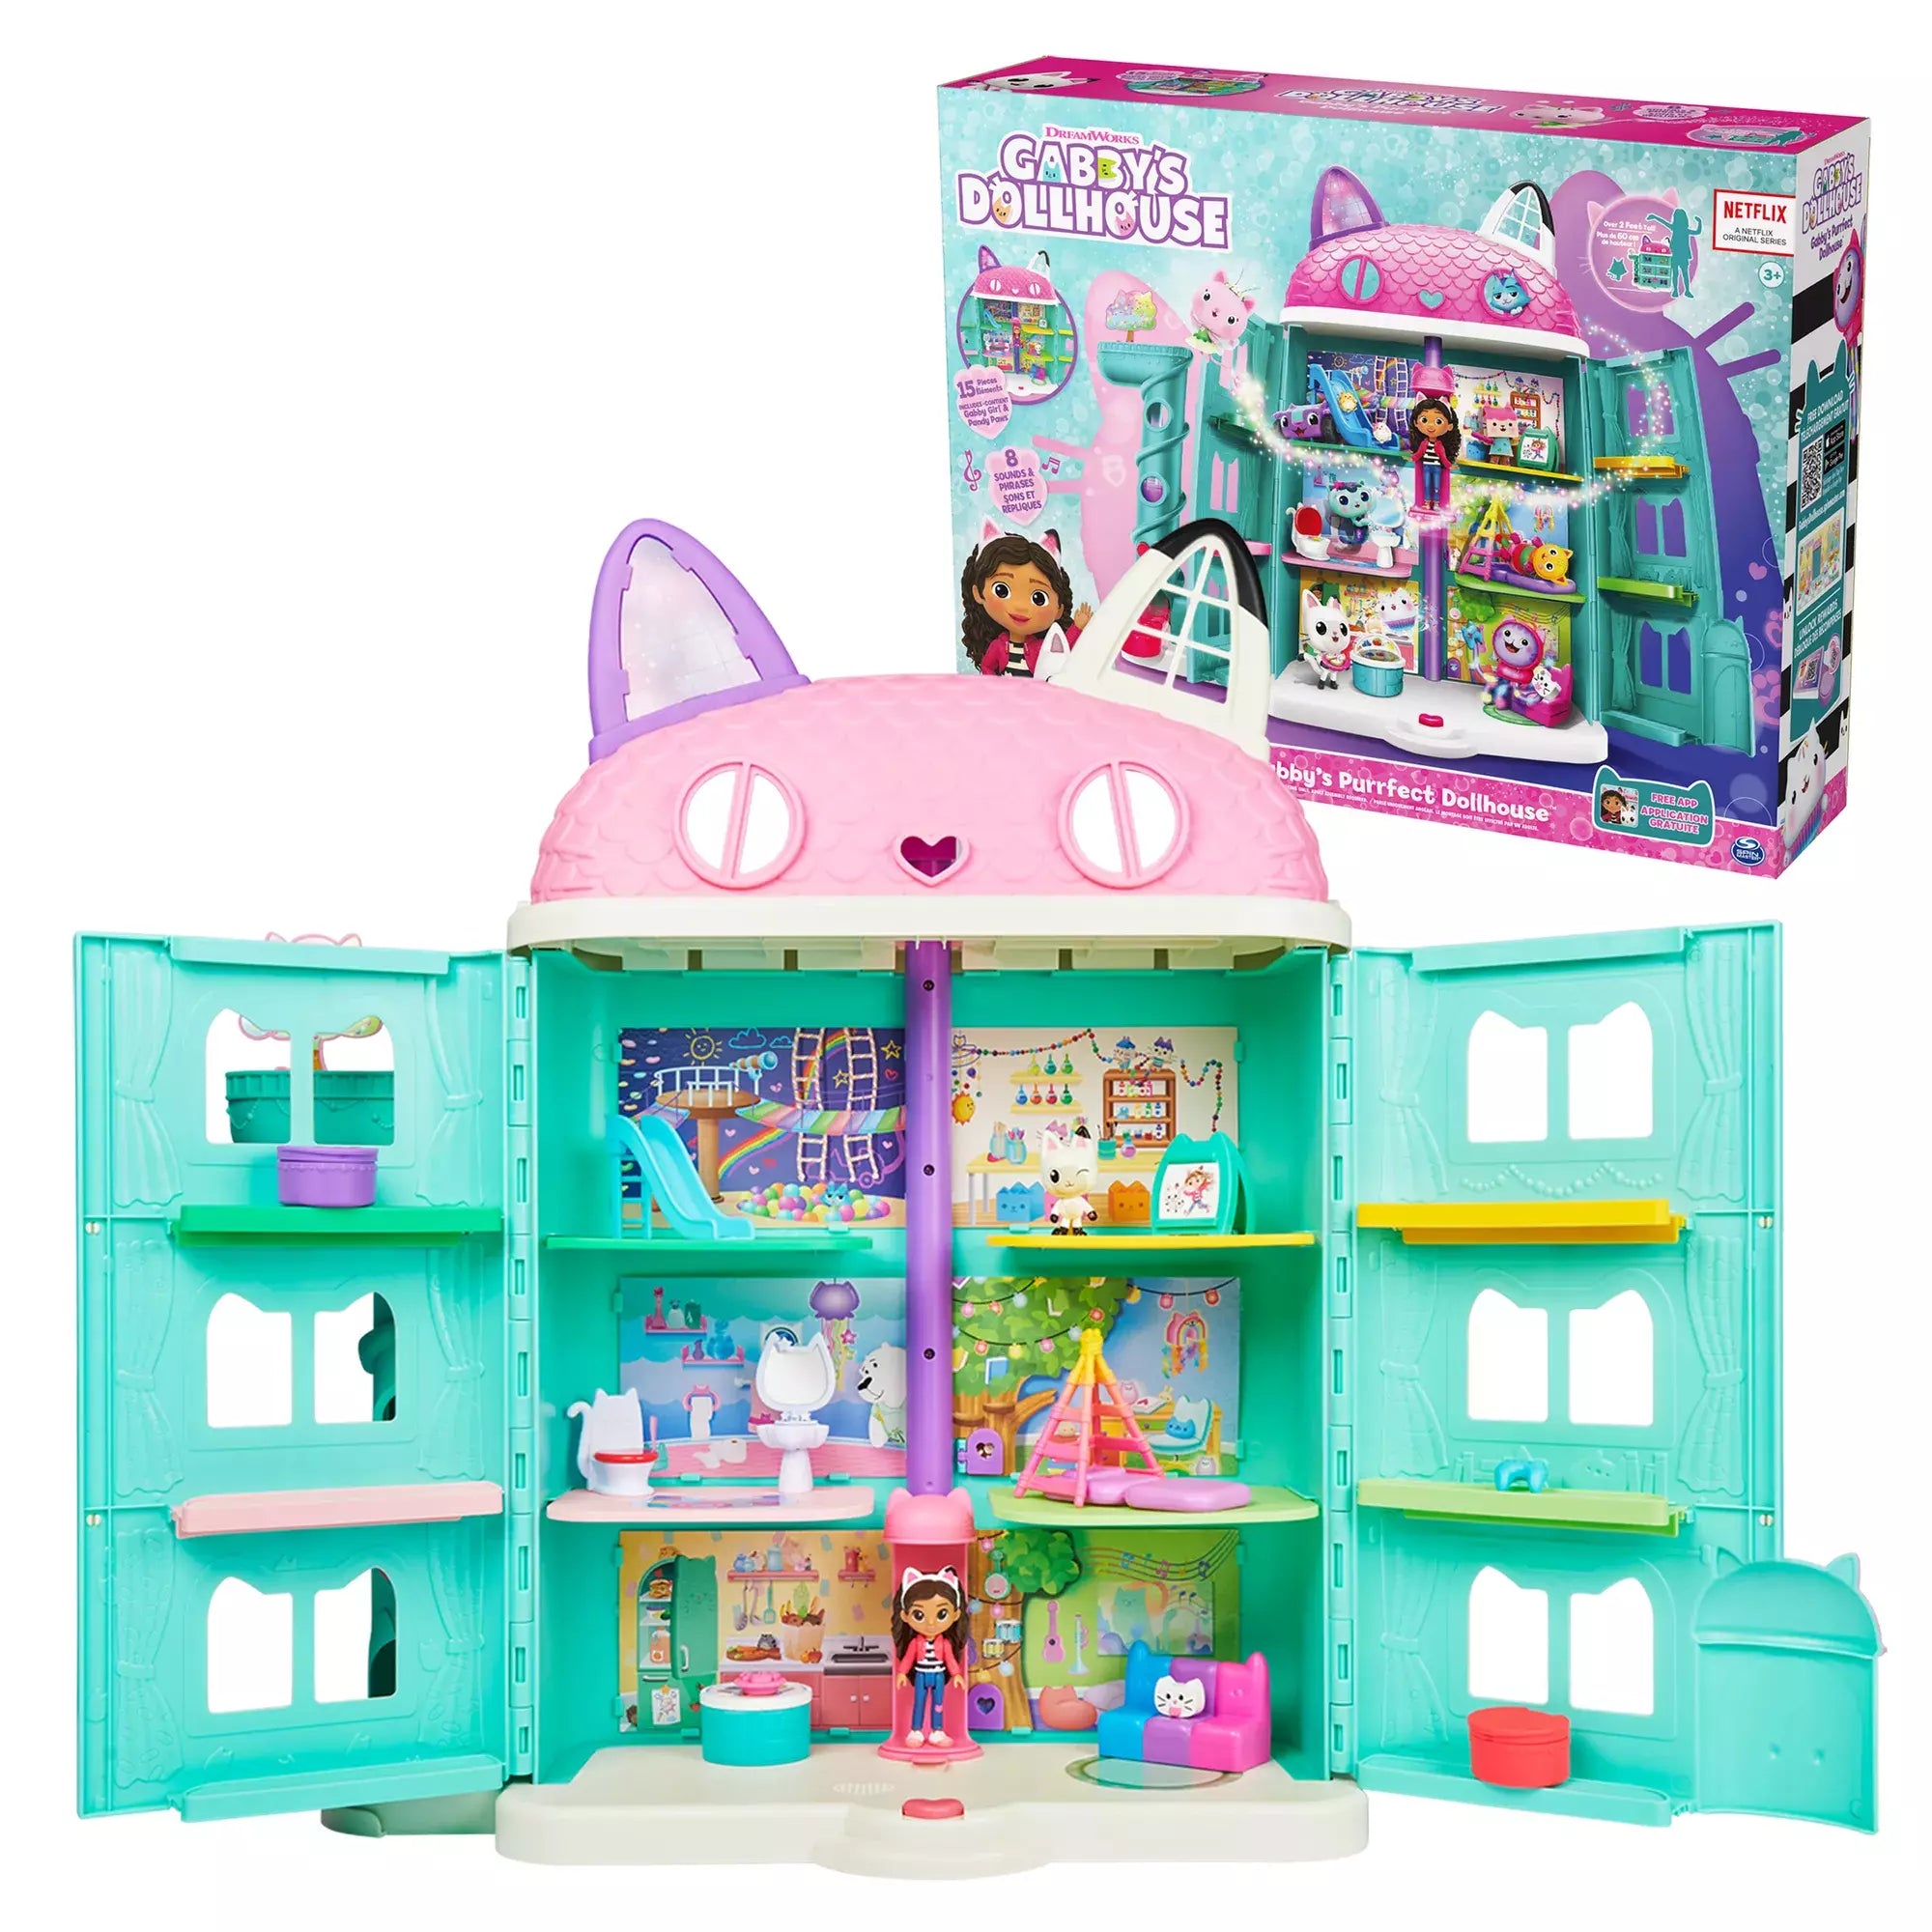 Gabby's Dollhouse Purrfect Doll House Requires 3xAAA Batteries